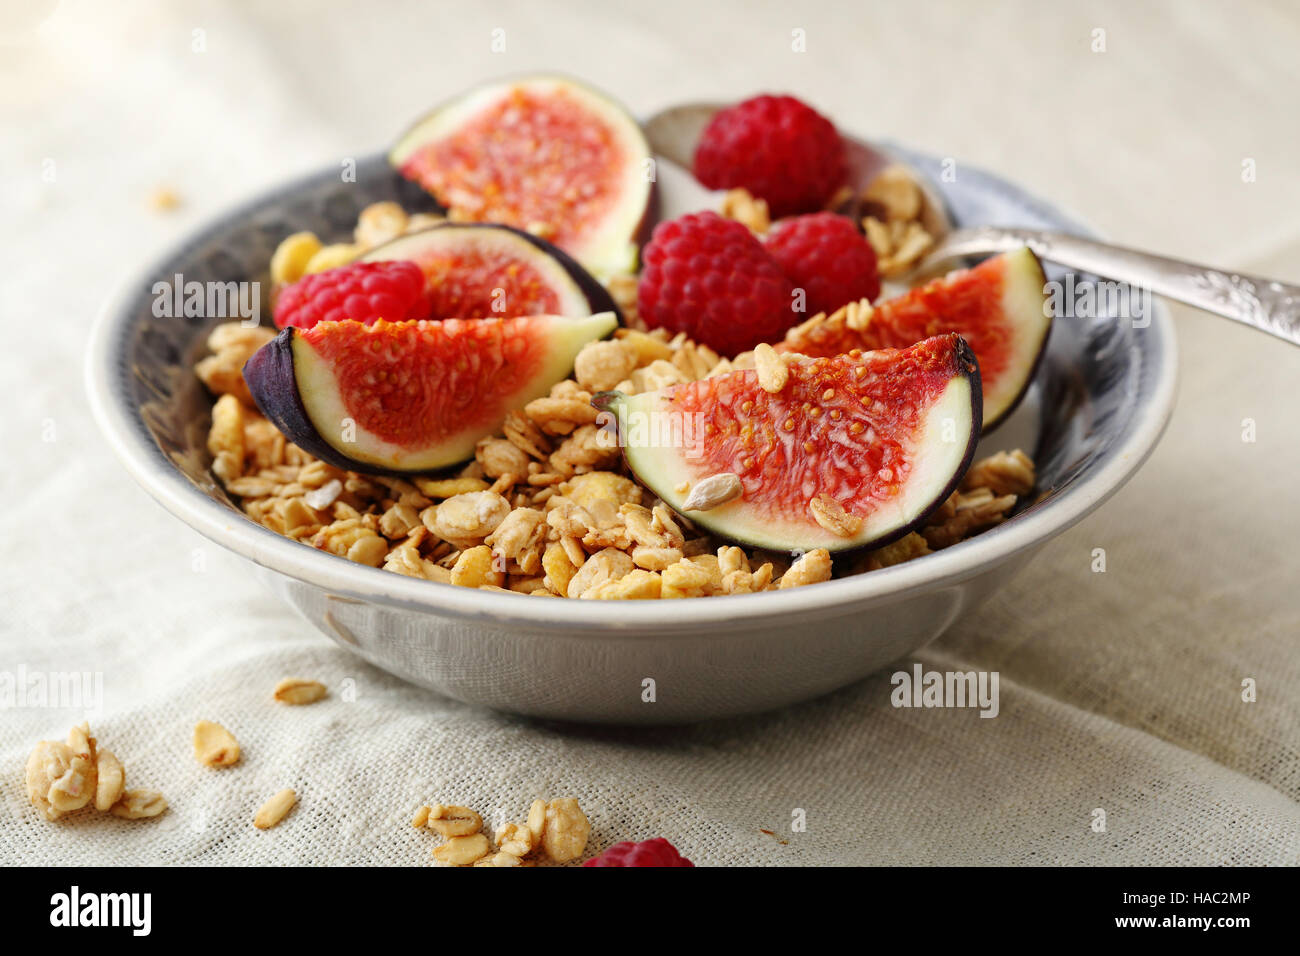 Breakfast cereals with figs and berry, food closeup Stock Photo